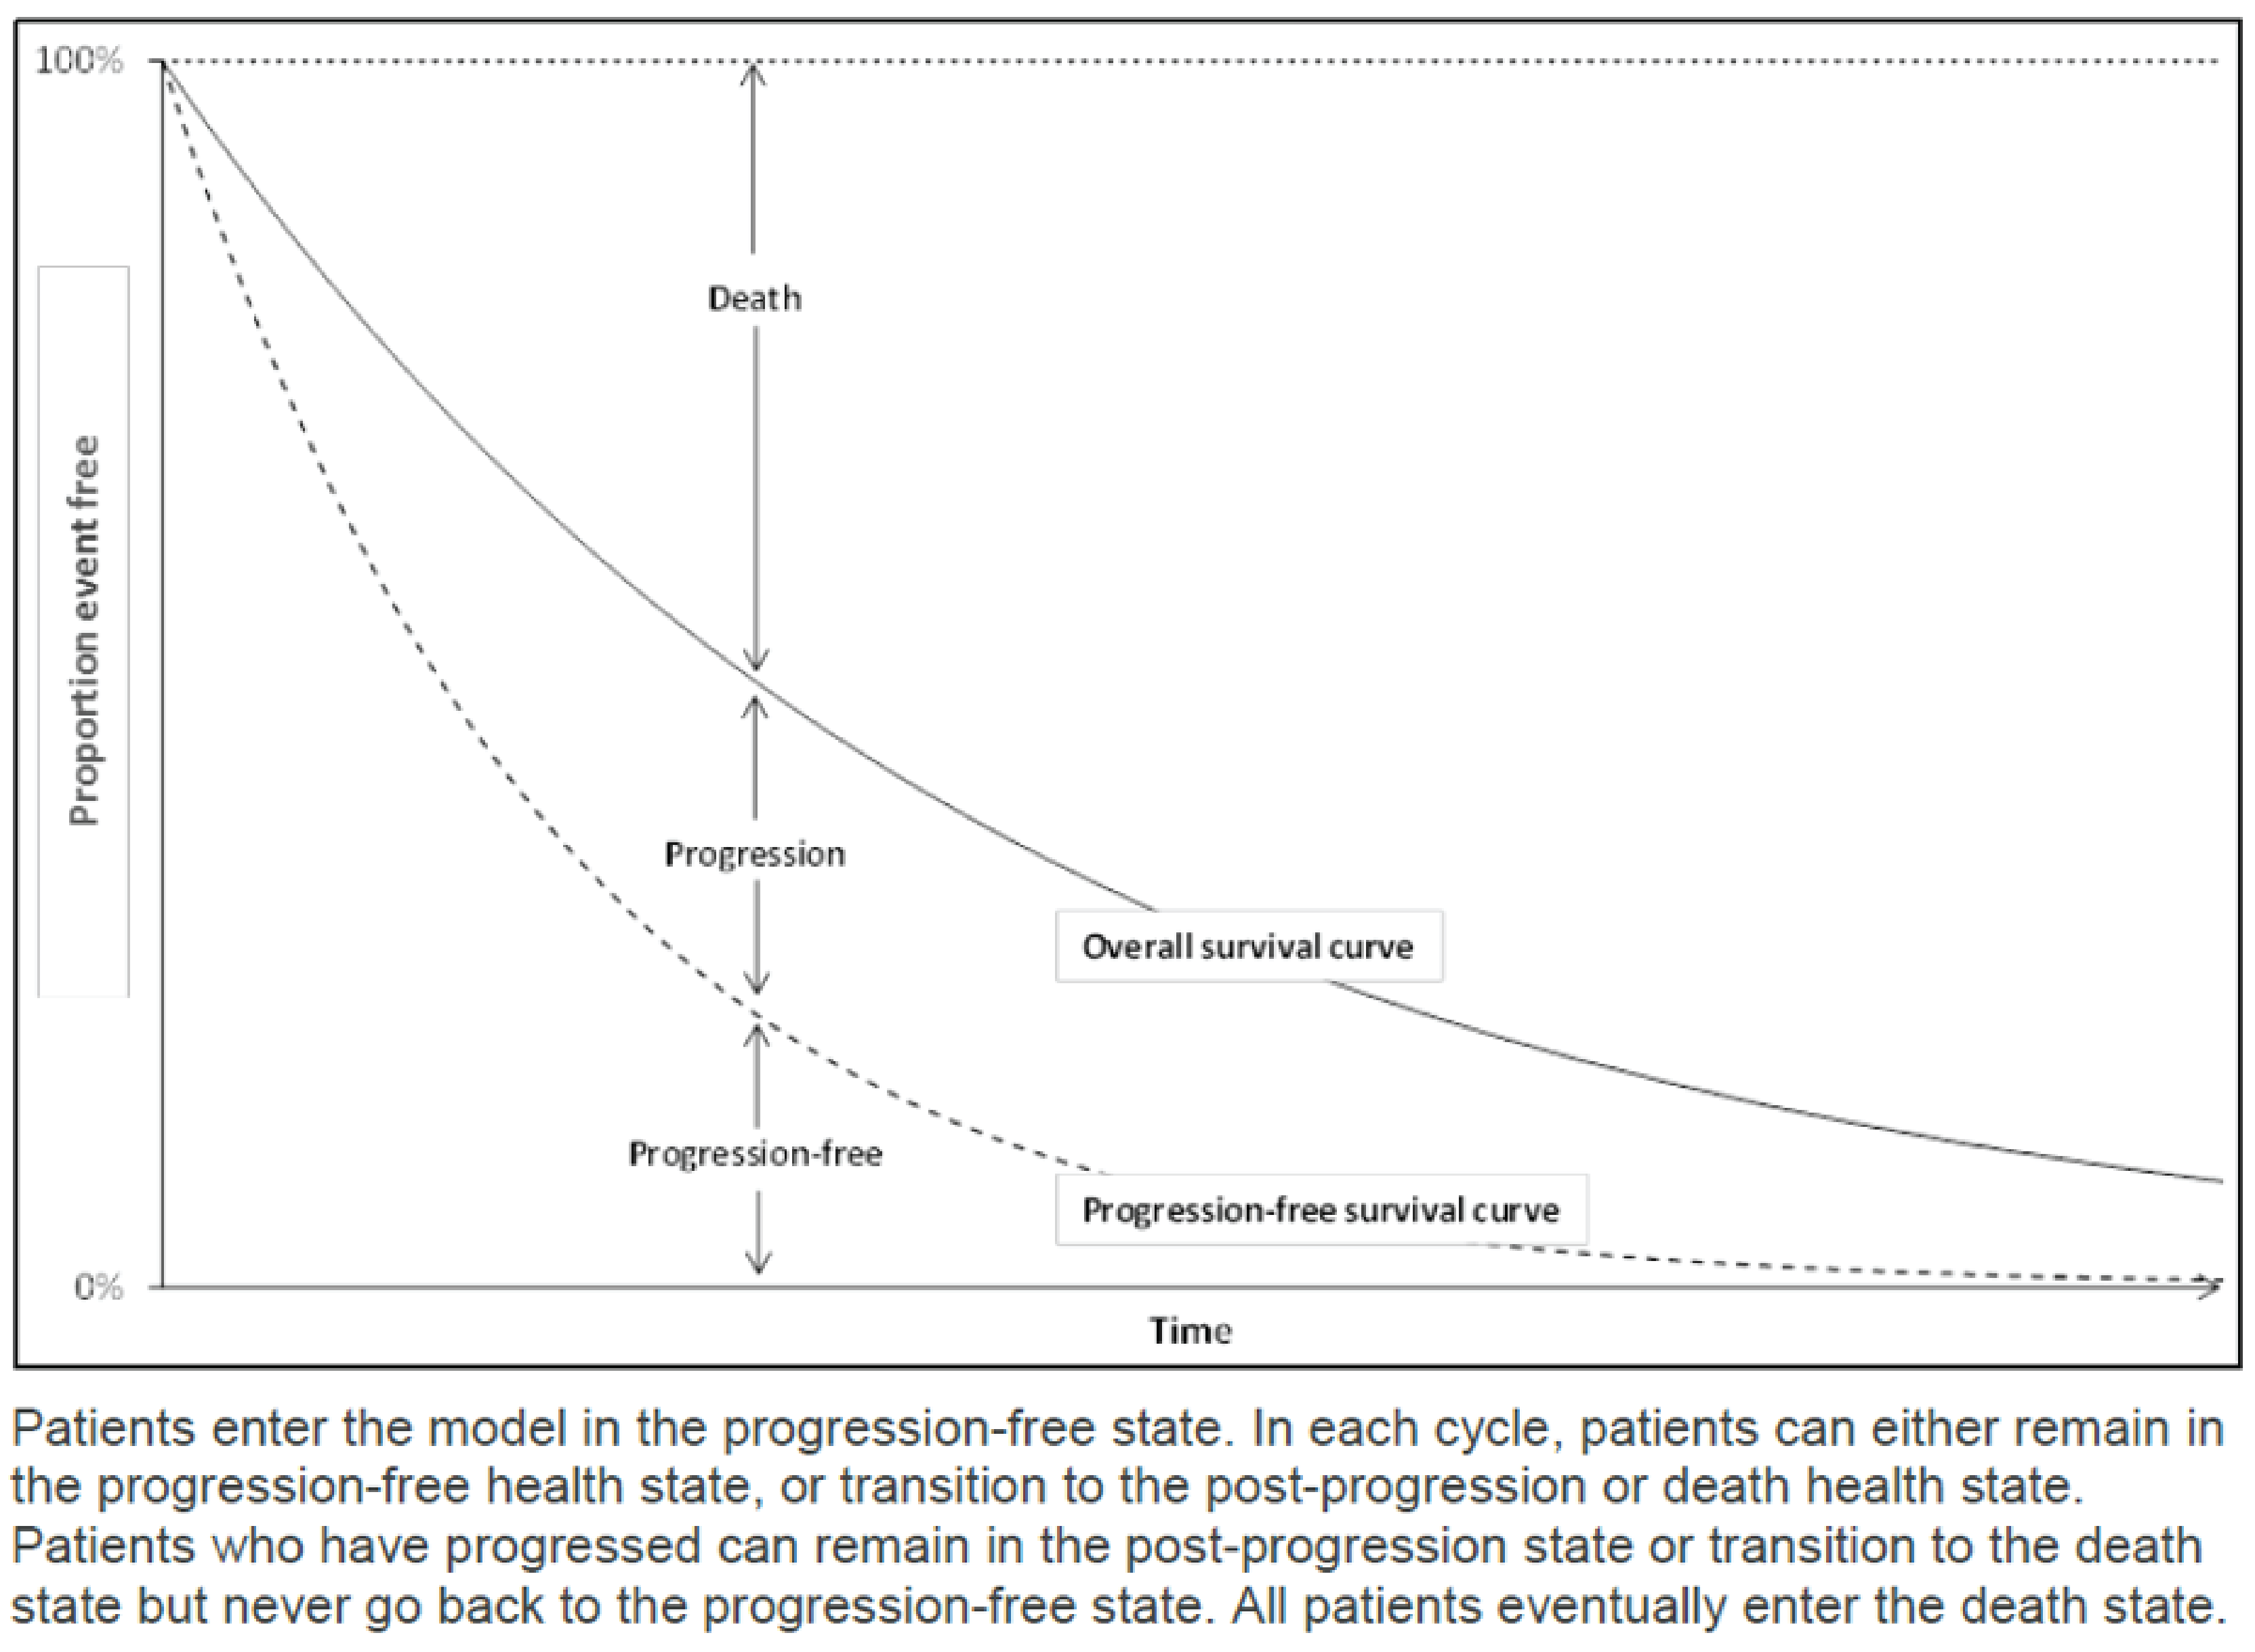 The figure depicts the partitioned survival model structure, where health state membership is derived from non–mutually exclusive curves. Overall survival is partitioned to estimate the proportion of patients in the progression-free and progressed health states.